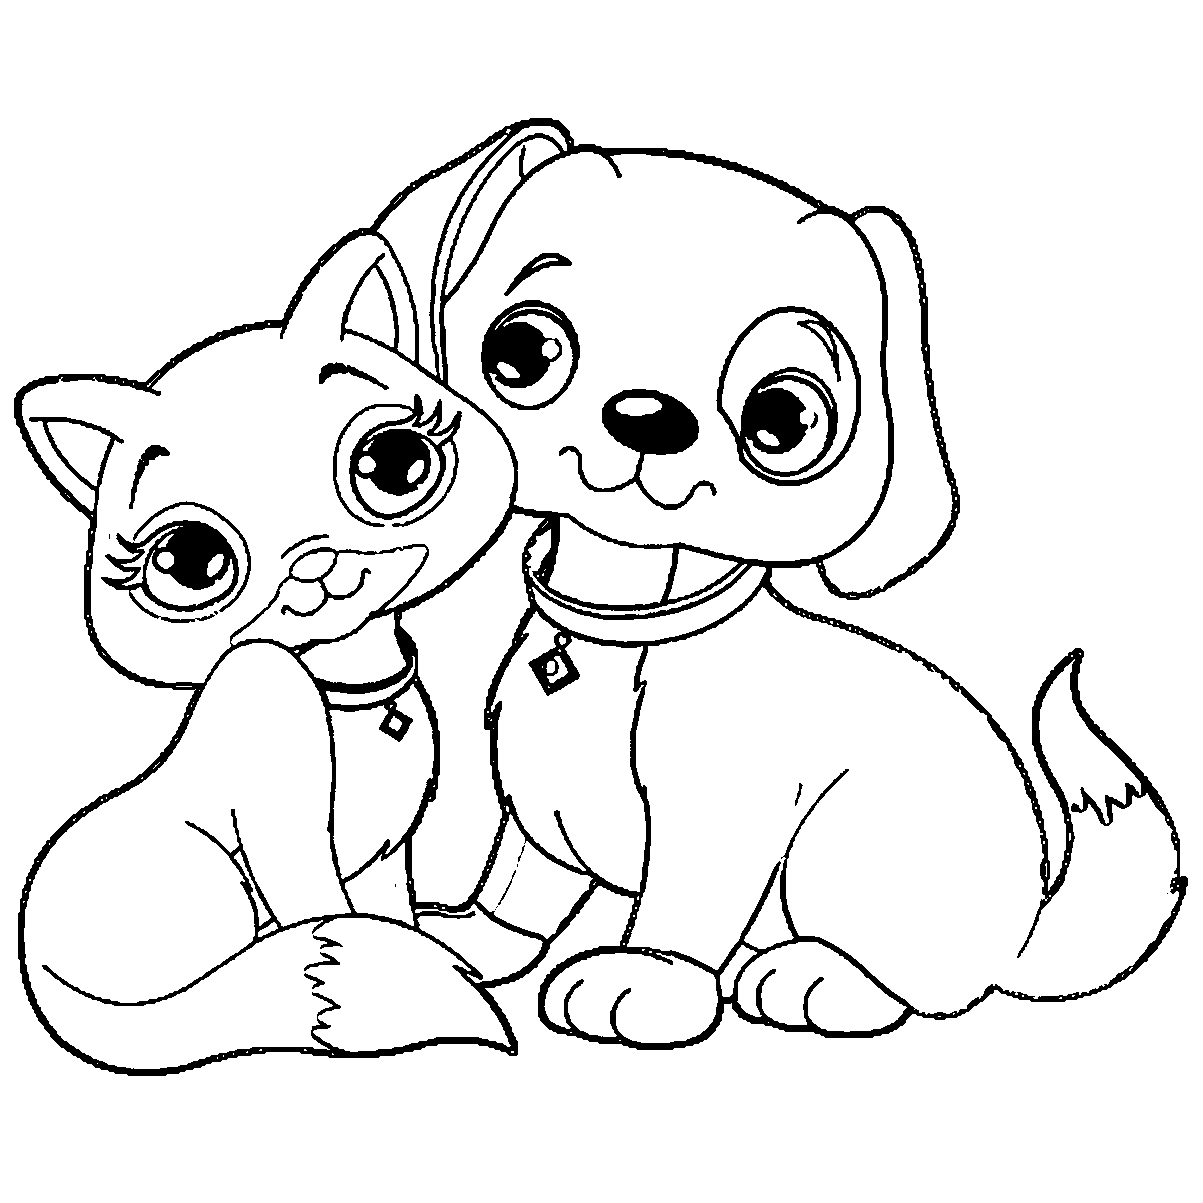 Puppy Outline Coloring Page Coloring Home